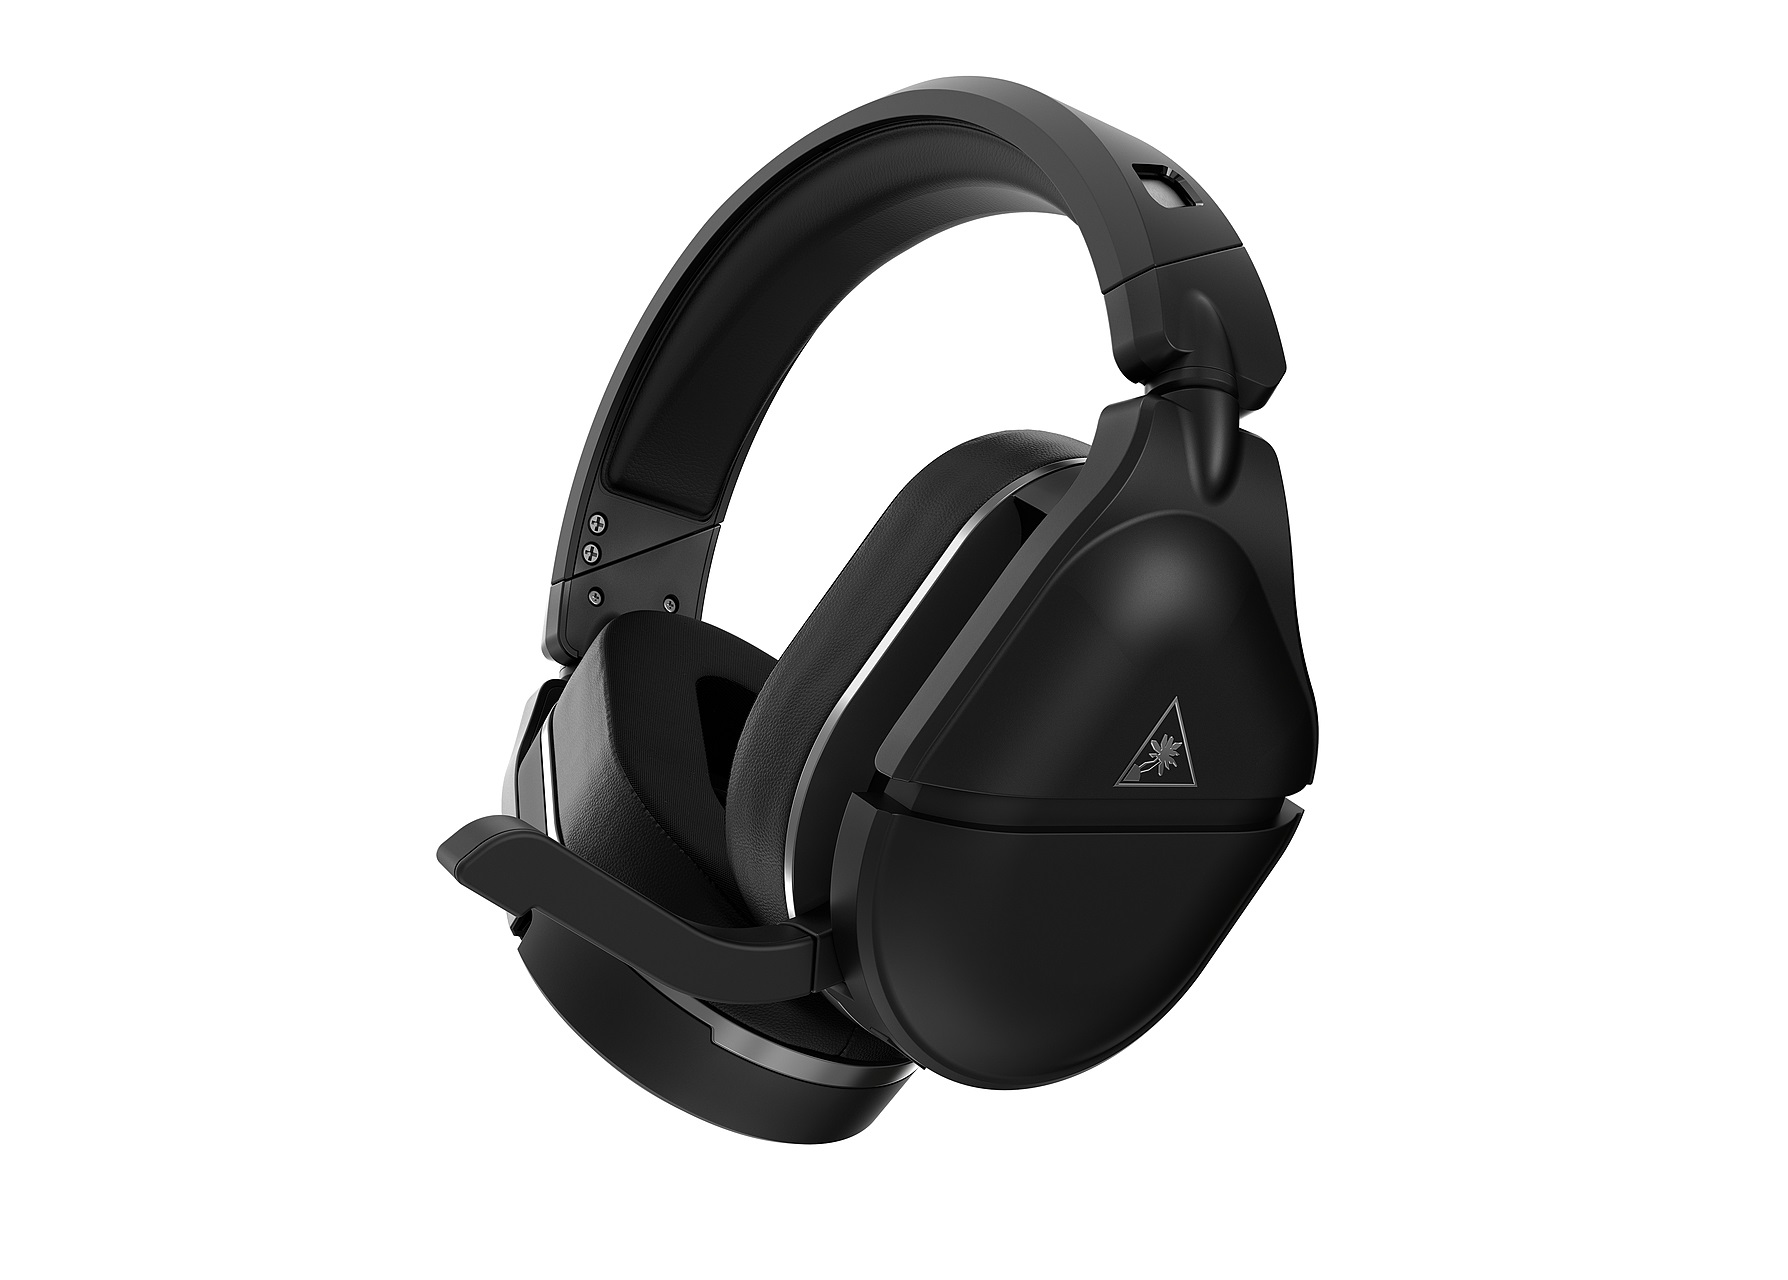 Turtle Beach、2.4GHzワイヤレスとBluetooth両対応のワイヤレスヘッドセット「Turtle Beach Stealth 700P Gen2」を1月15日(金)に国内発売